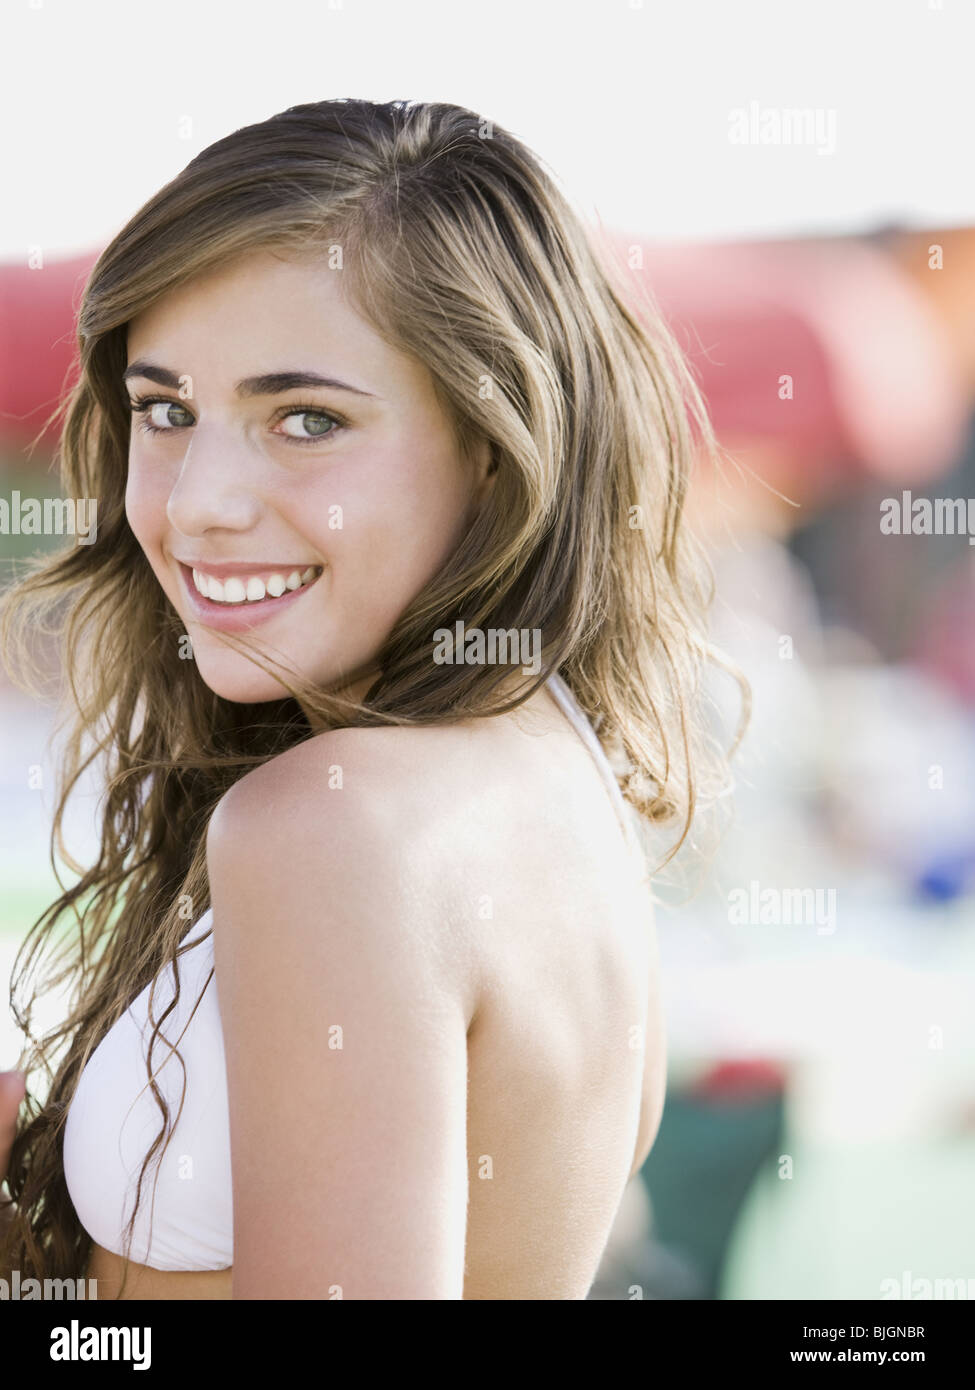 young woman in a white swimsuit Stock Photo